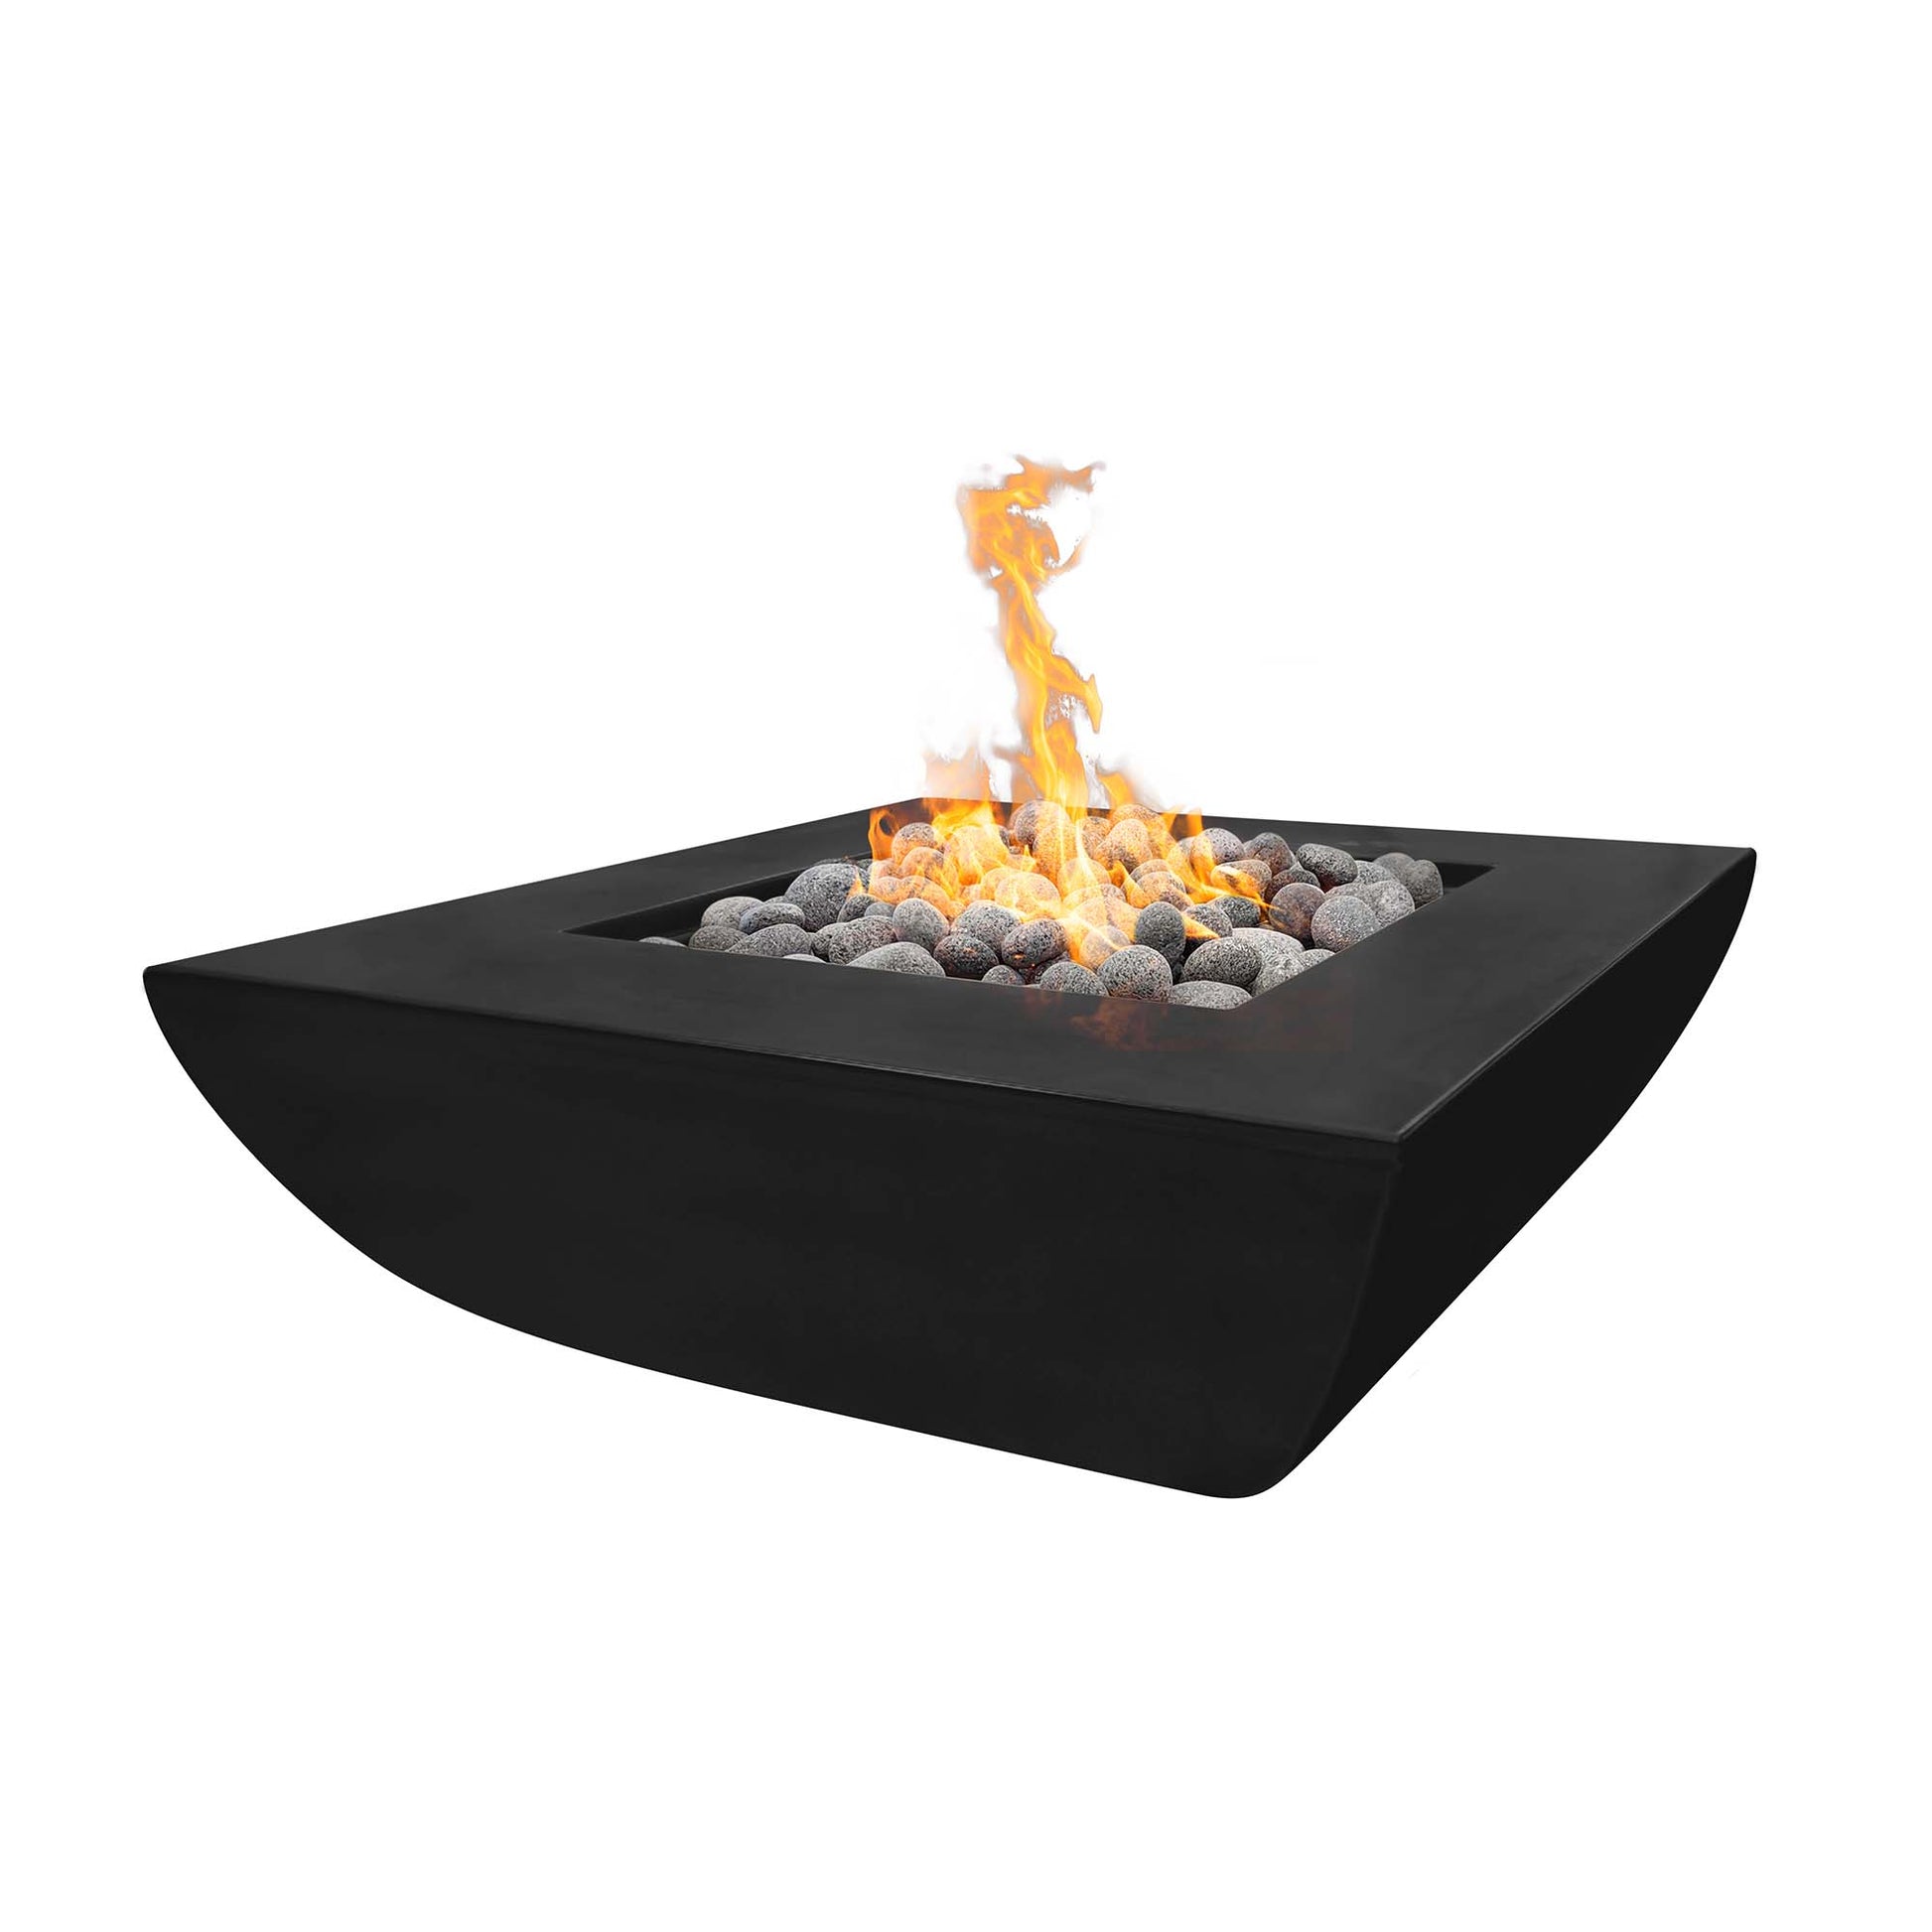 The Outdoor Plus Square Avalon 42" Metallic Pearl GFRC Concrete Liquid Propane Fire Pit with Match Lit with Flame Sense Ignition